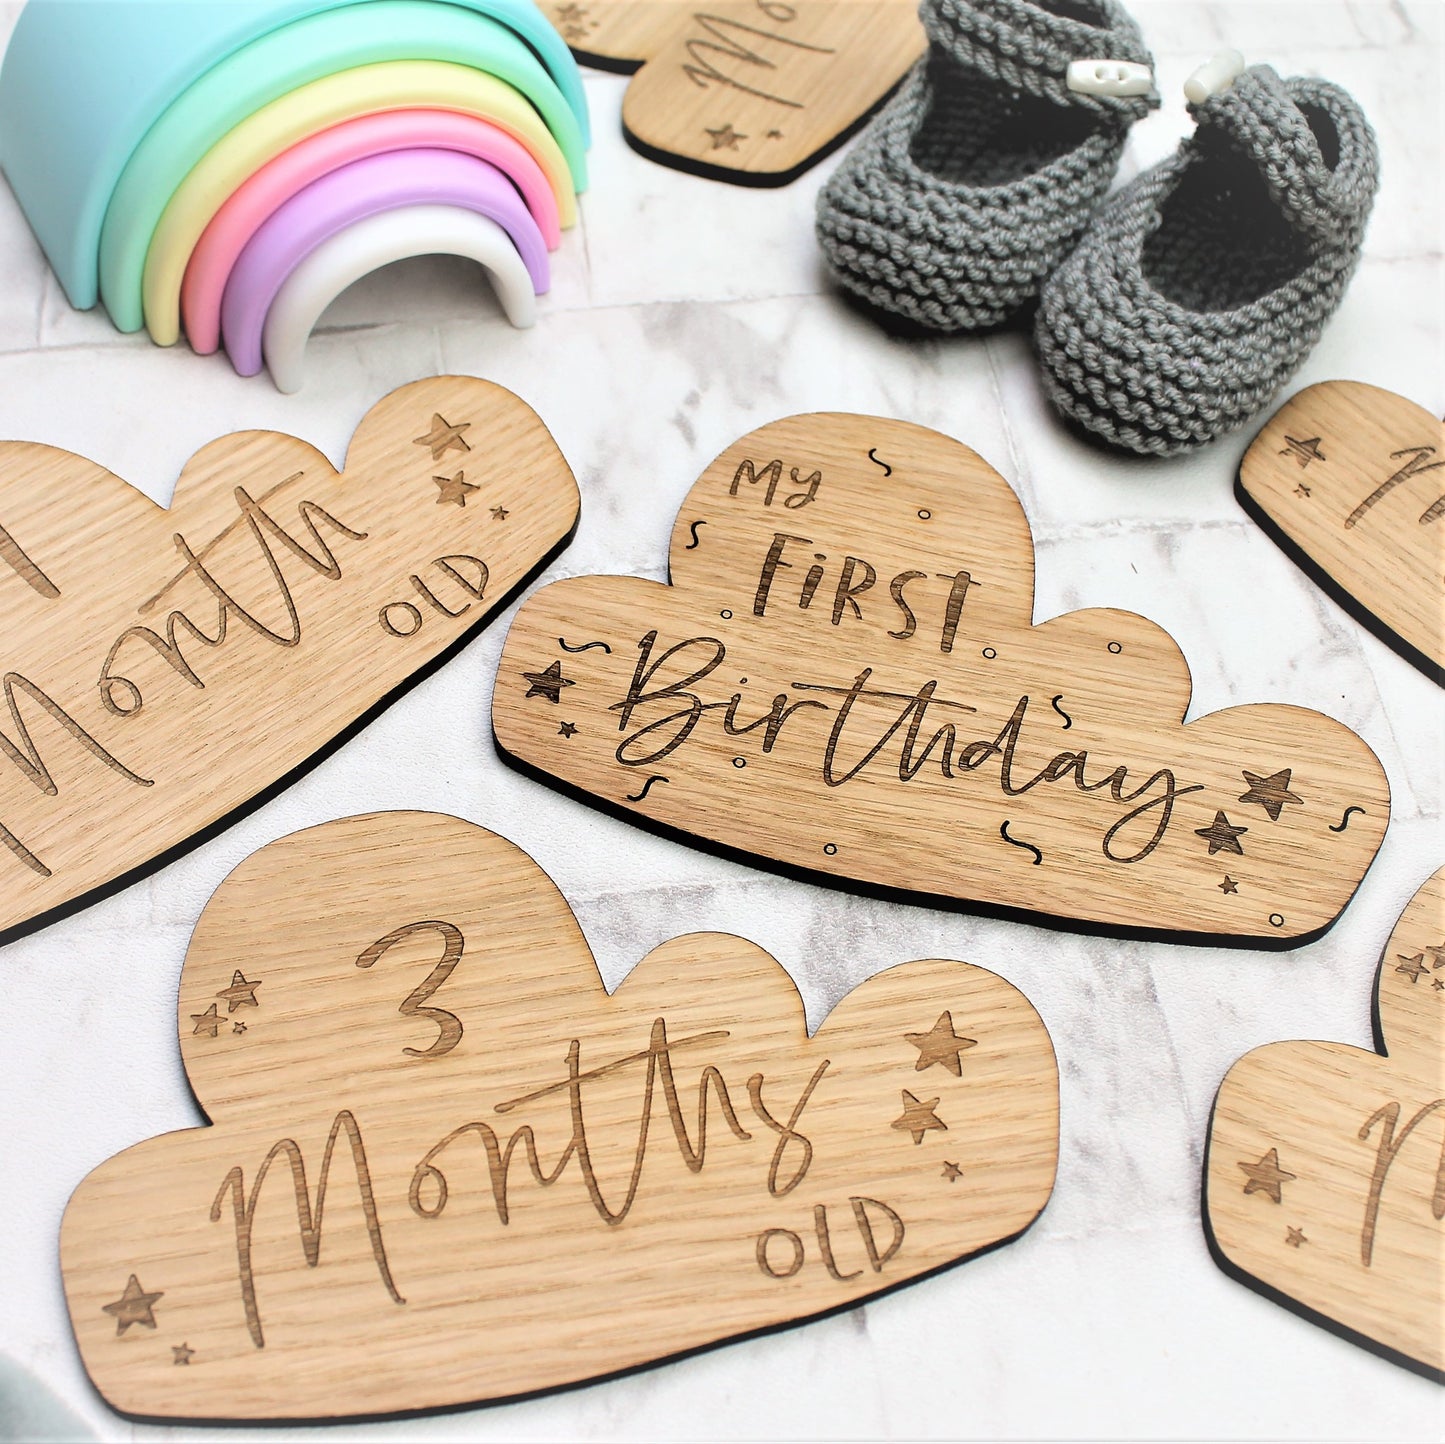 wooden cloud shape engraved baby milestone cards, engraved with first months, first birthday and moments